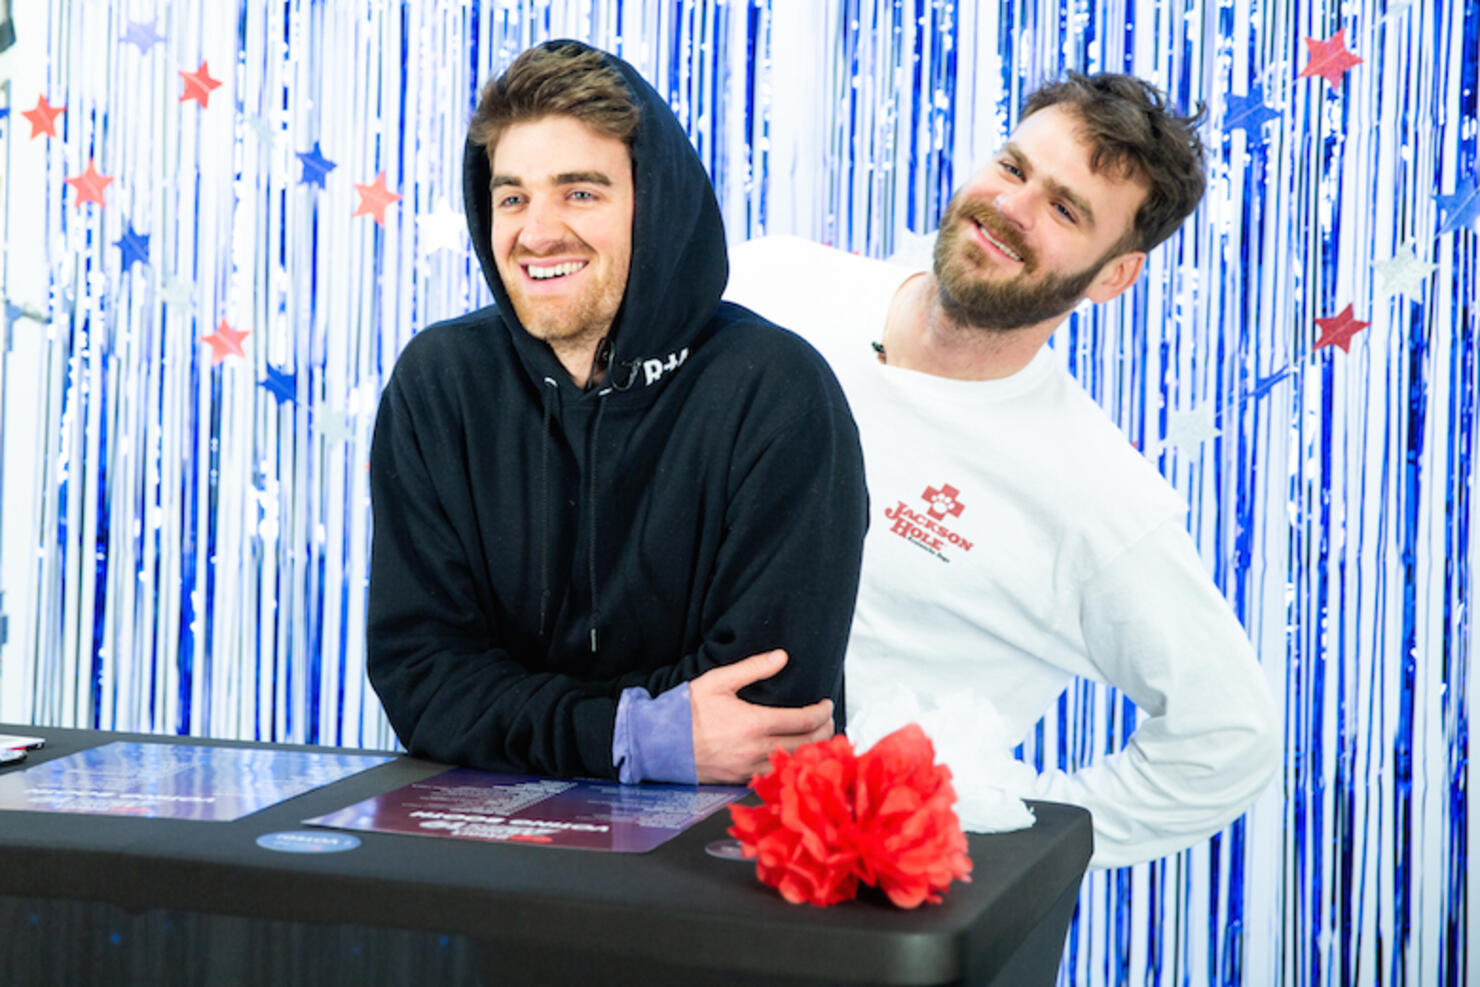 The Chainsmokers 2019